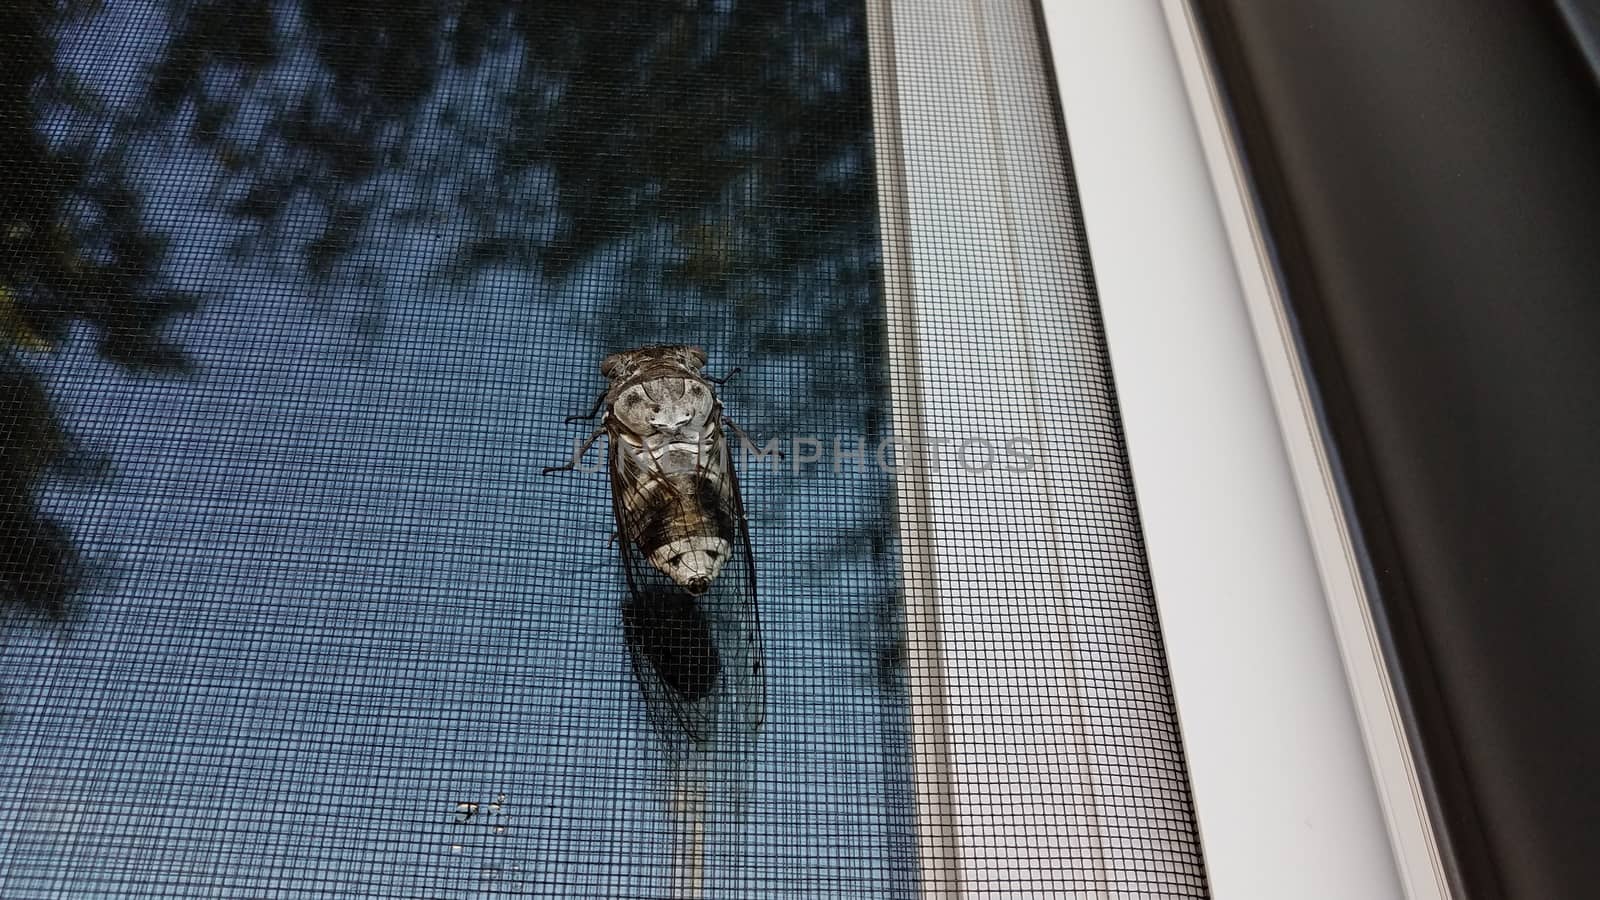 cicada insect or bug on window screen by stockphotofan1